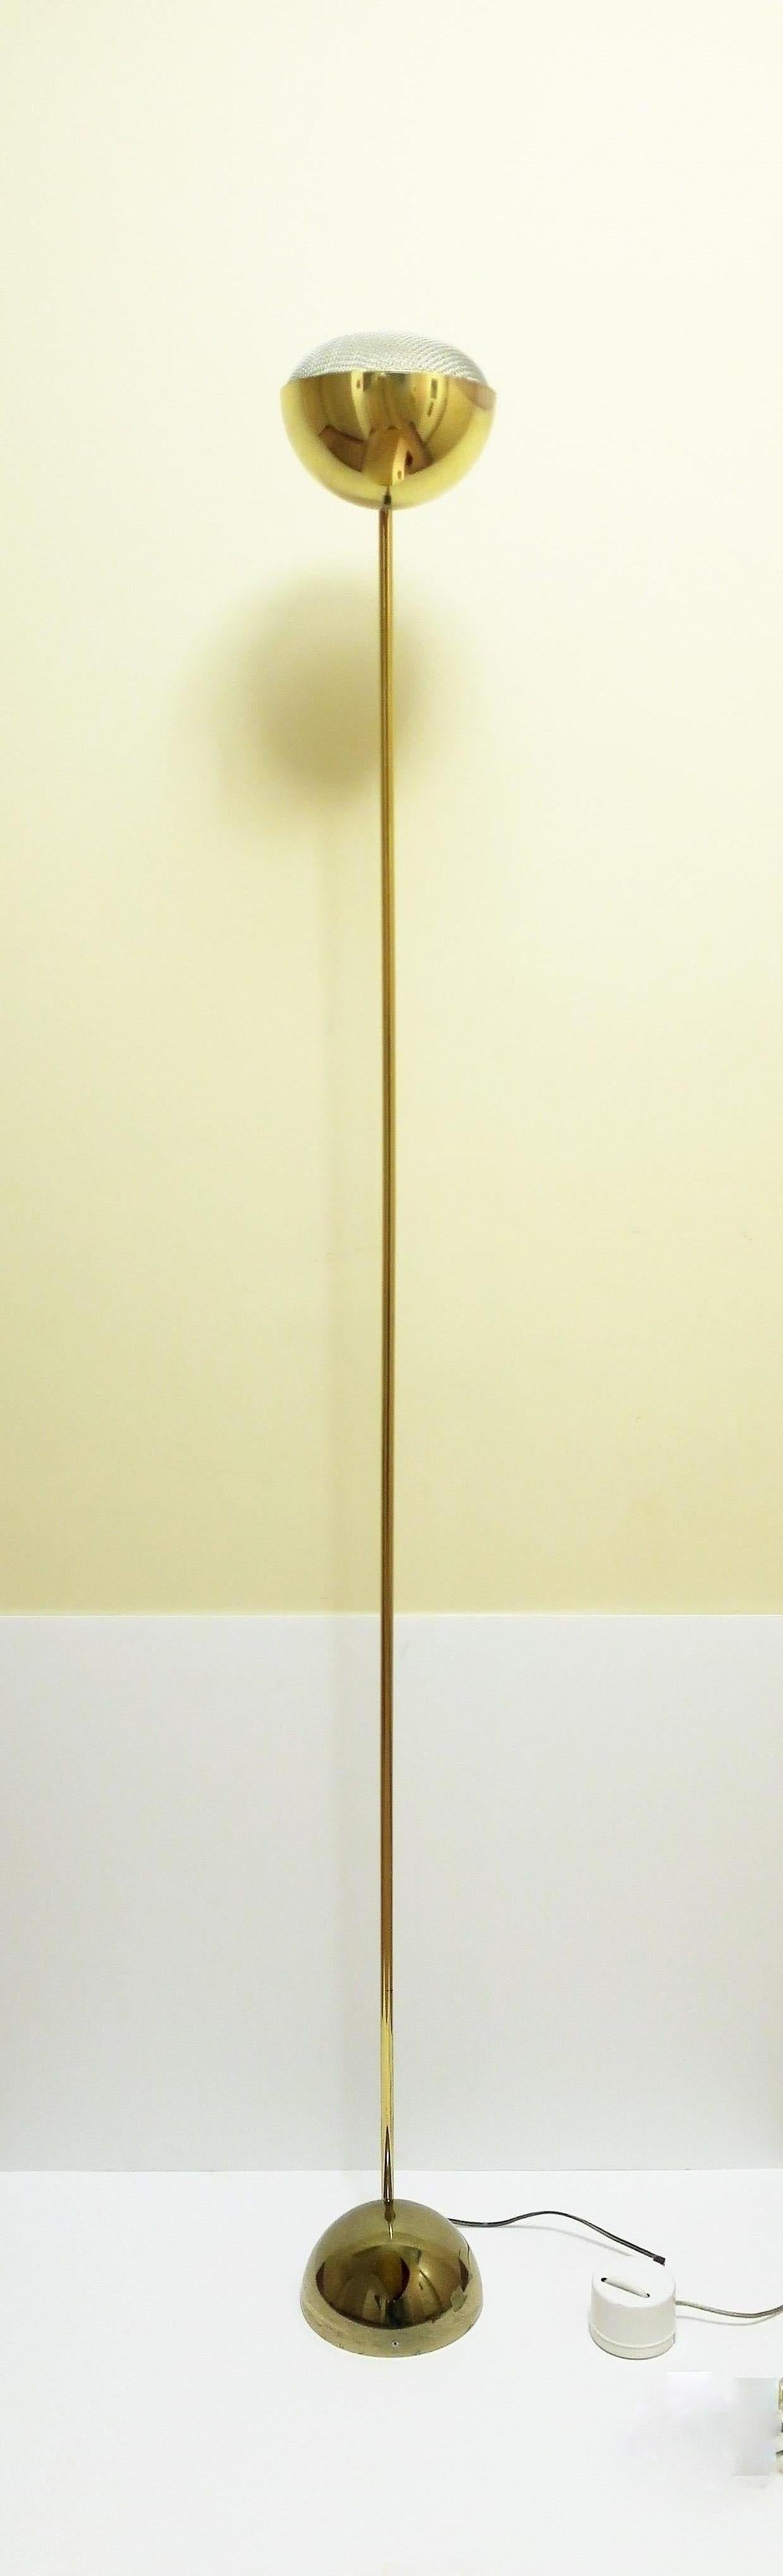 A substantial '70s Modern Postmodern period brass plated floor lamp, circa late-1970s, USA. On/Off switch at bottom with dimmer offering a wide range of light from low to bright. Shown in 'on' position in image #12. 

Measures: 70